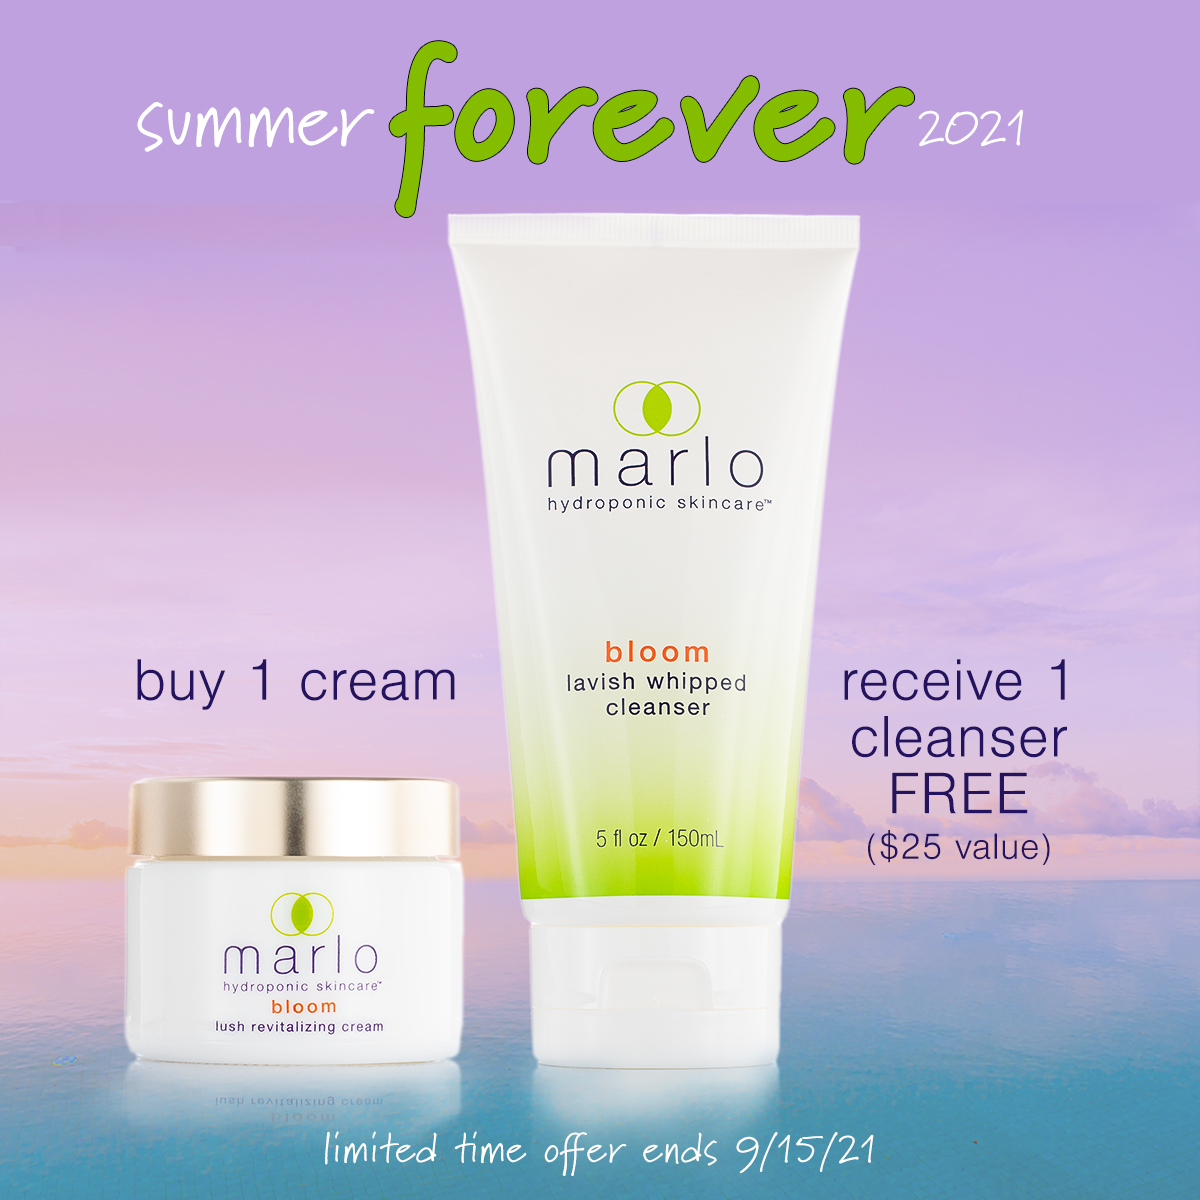 marlo hydroponic skincare summer forever